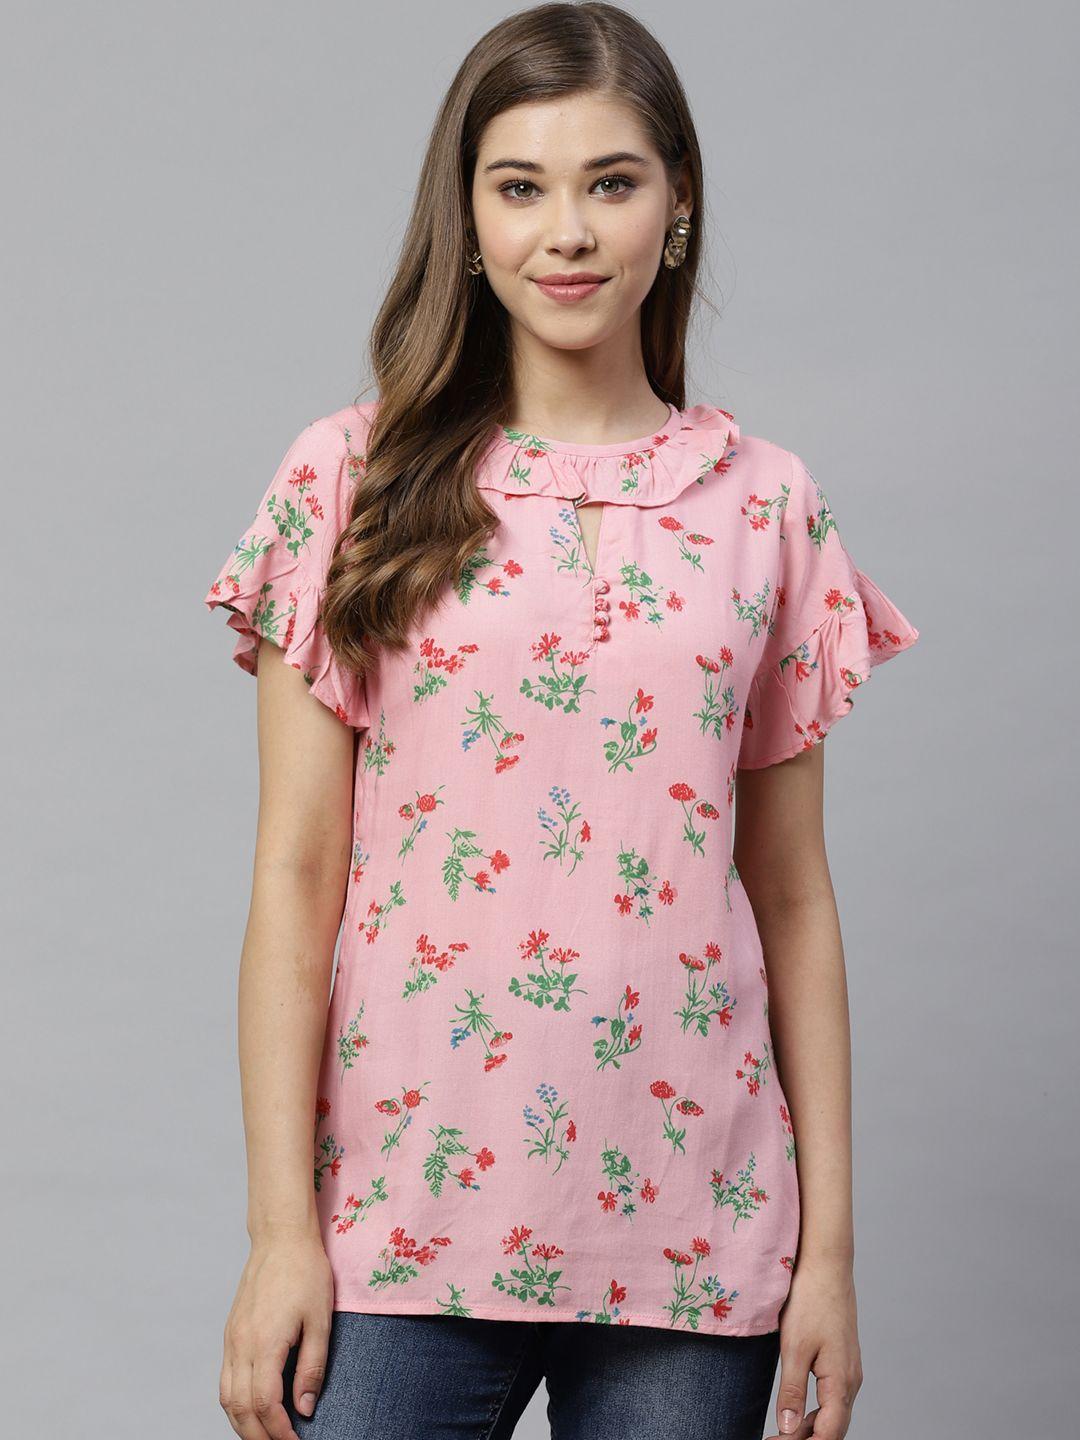 yash gallery women pink & green floral print top